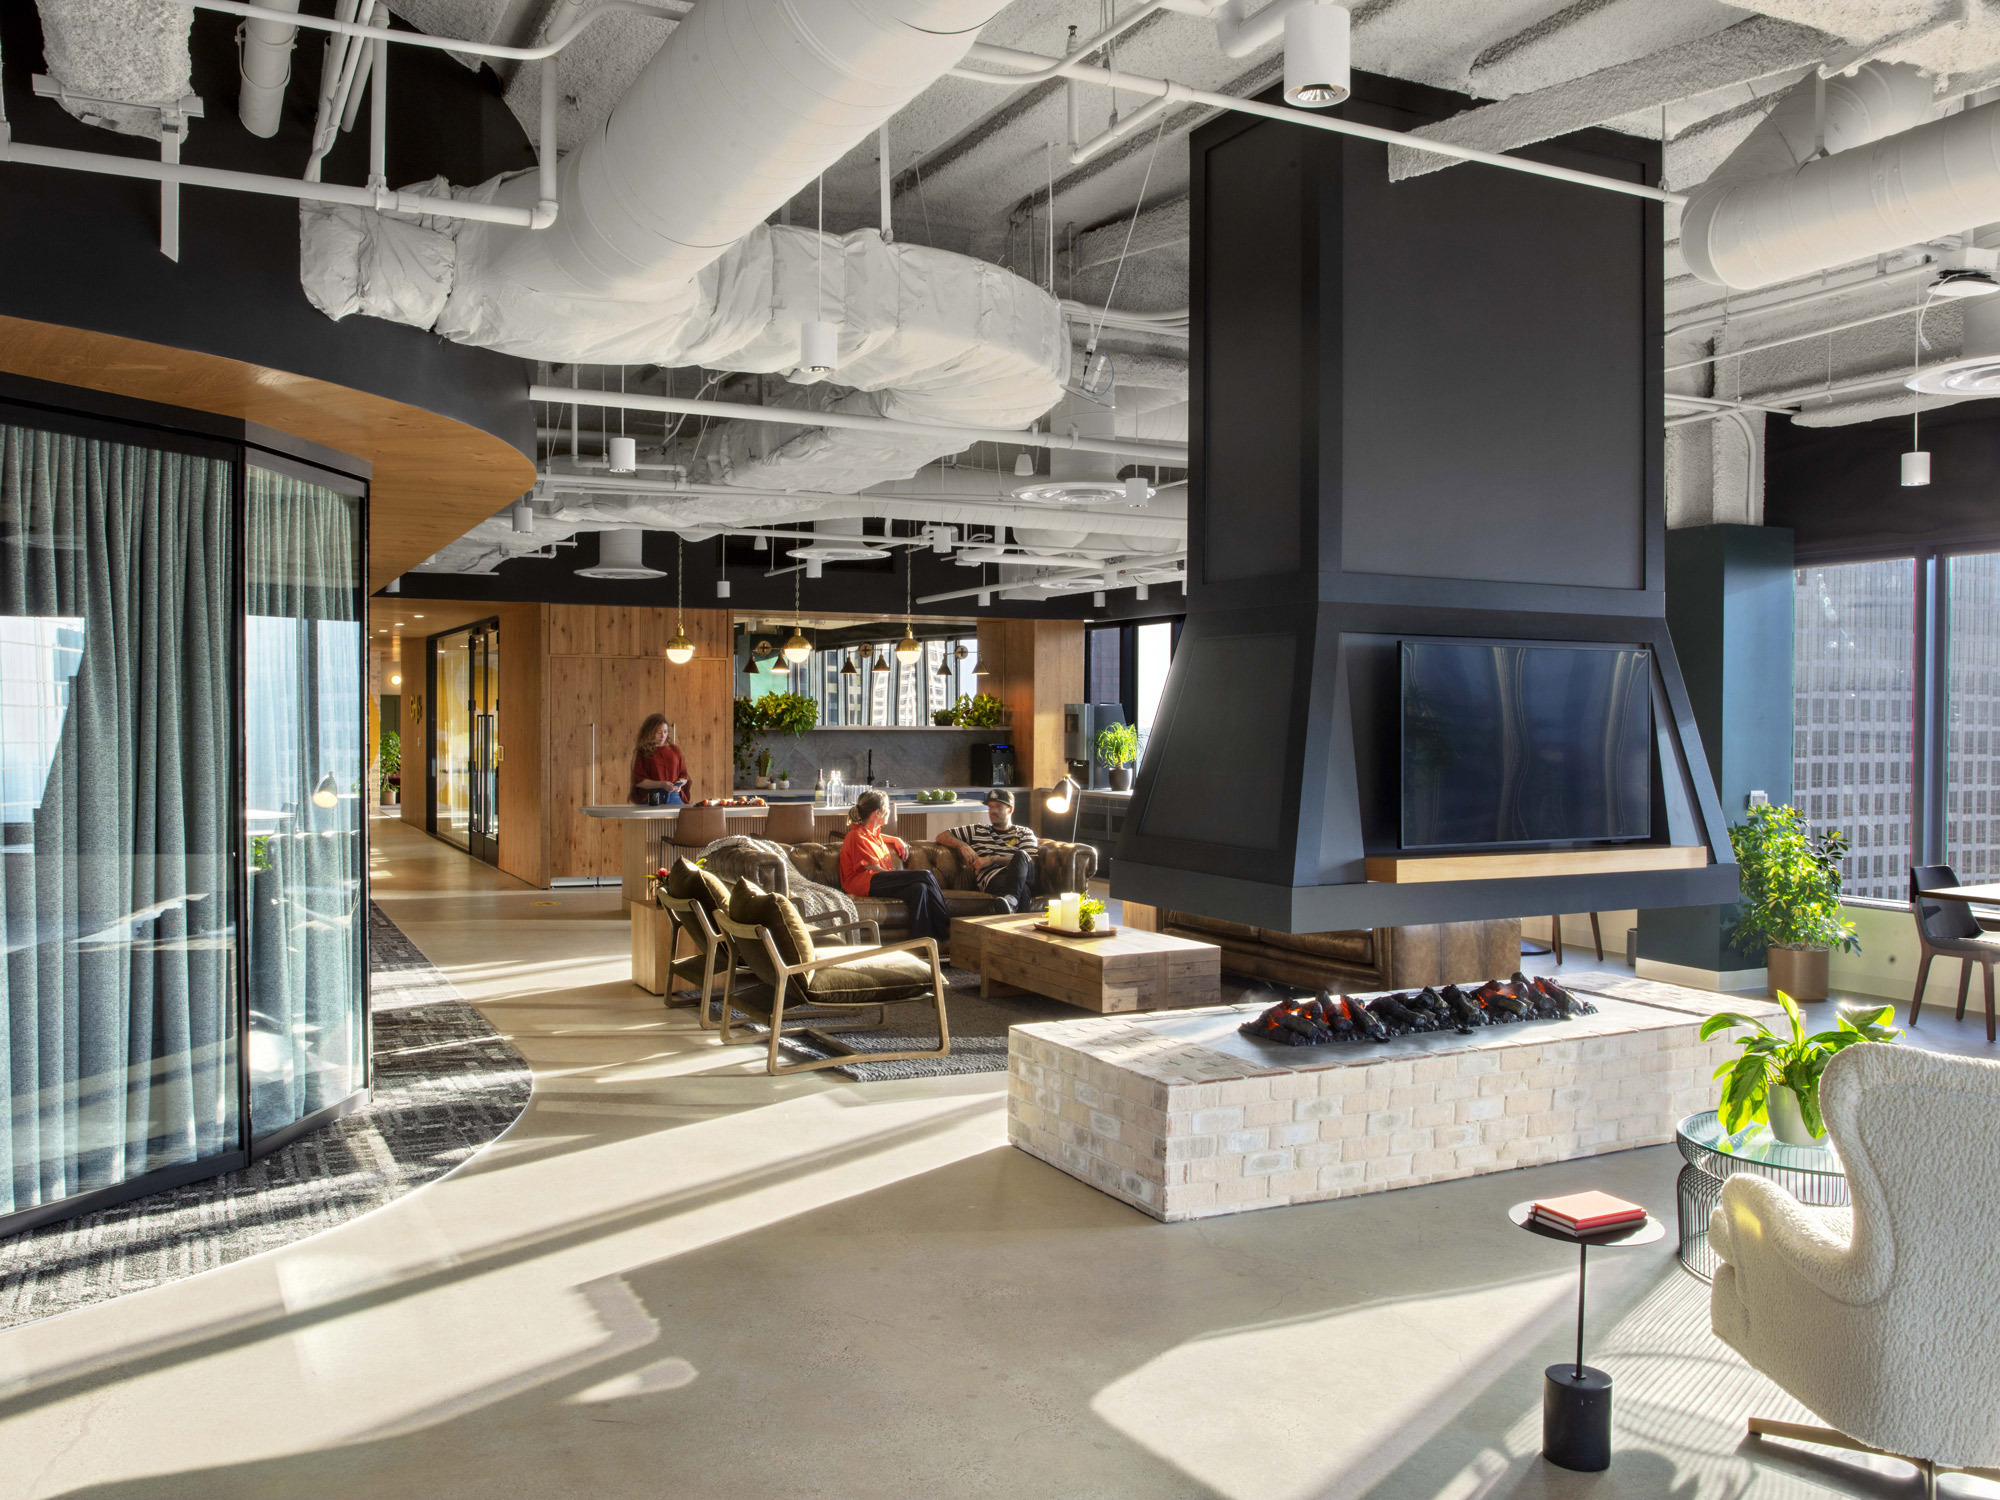 Modern office lounge with exposed ceiling pipes painted white, accented by a central black pendant fireplace. Floor-to-ceiling windows allow natural light, complementing the wood-finished bar area and plants adding a touch of greenery. Plush seating arrangements offer a casual meeting space.